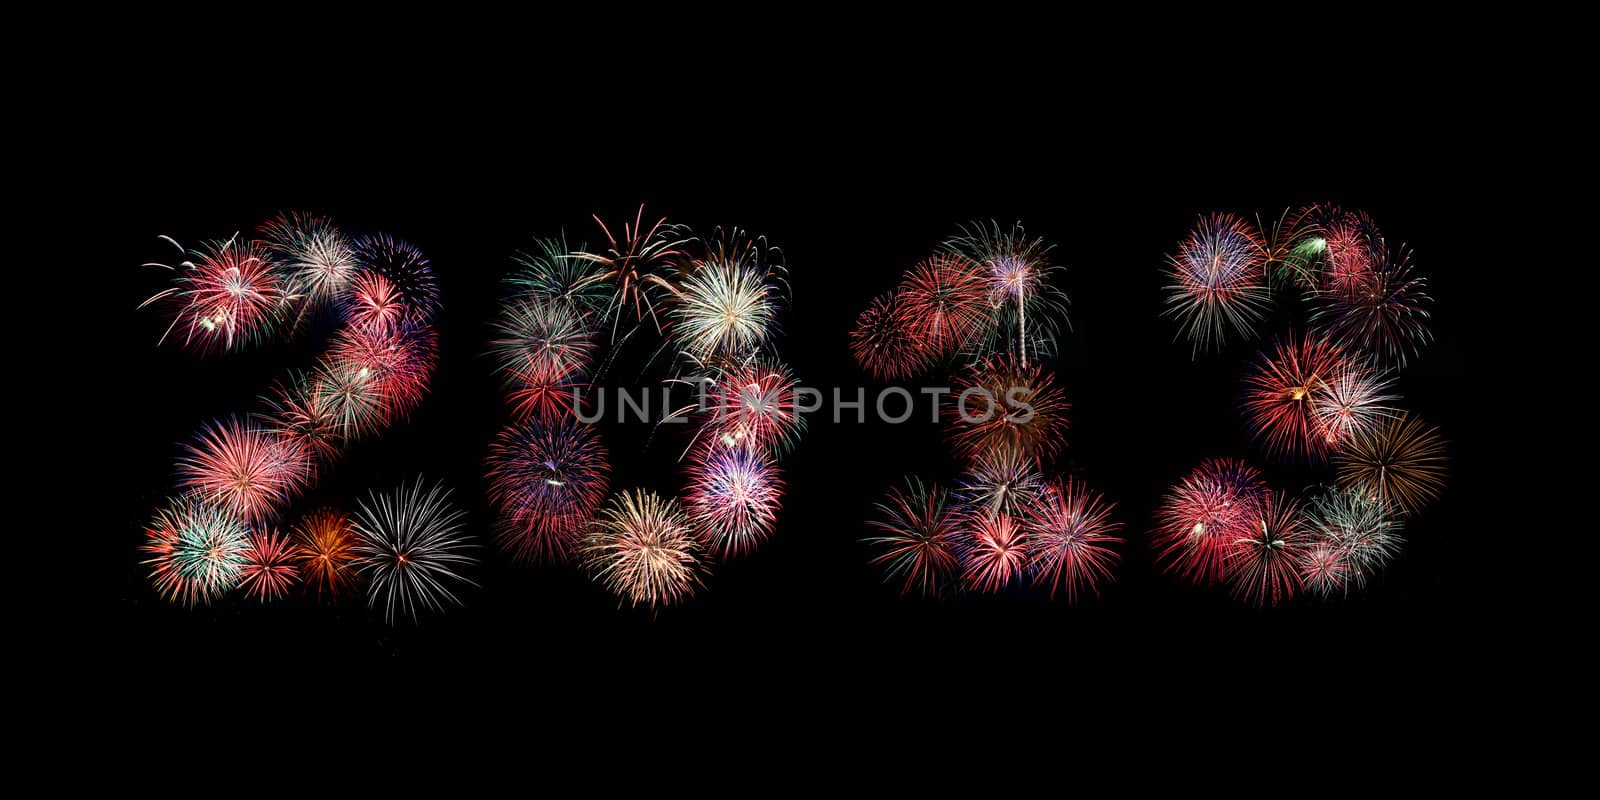 The year 2013 written in fireworks by sgoodwin4813